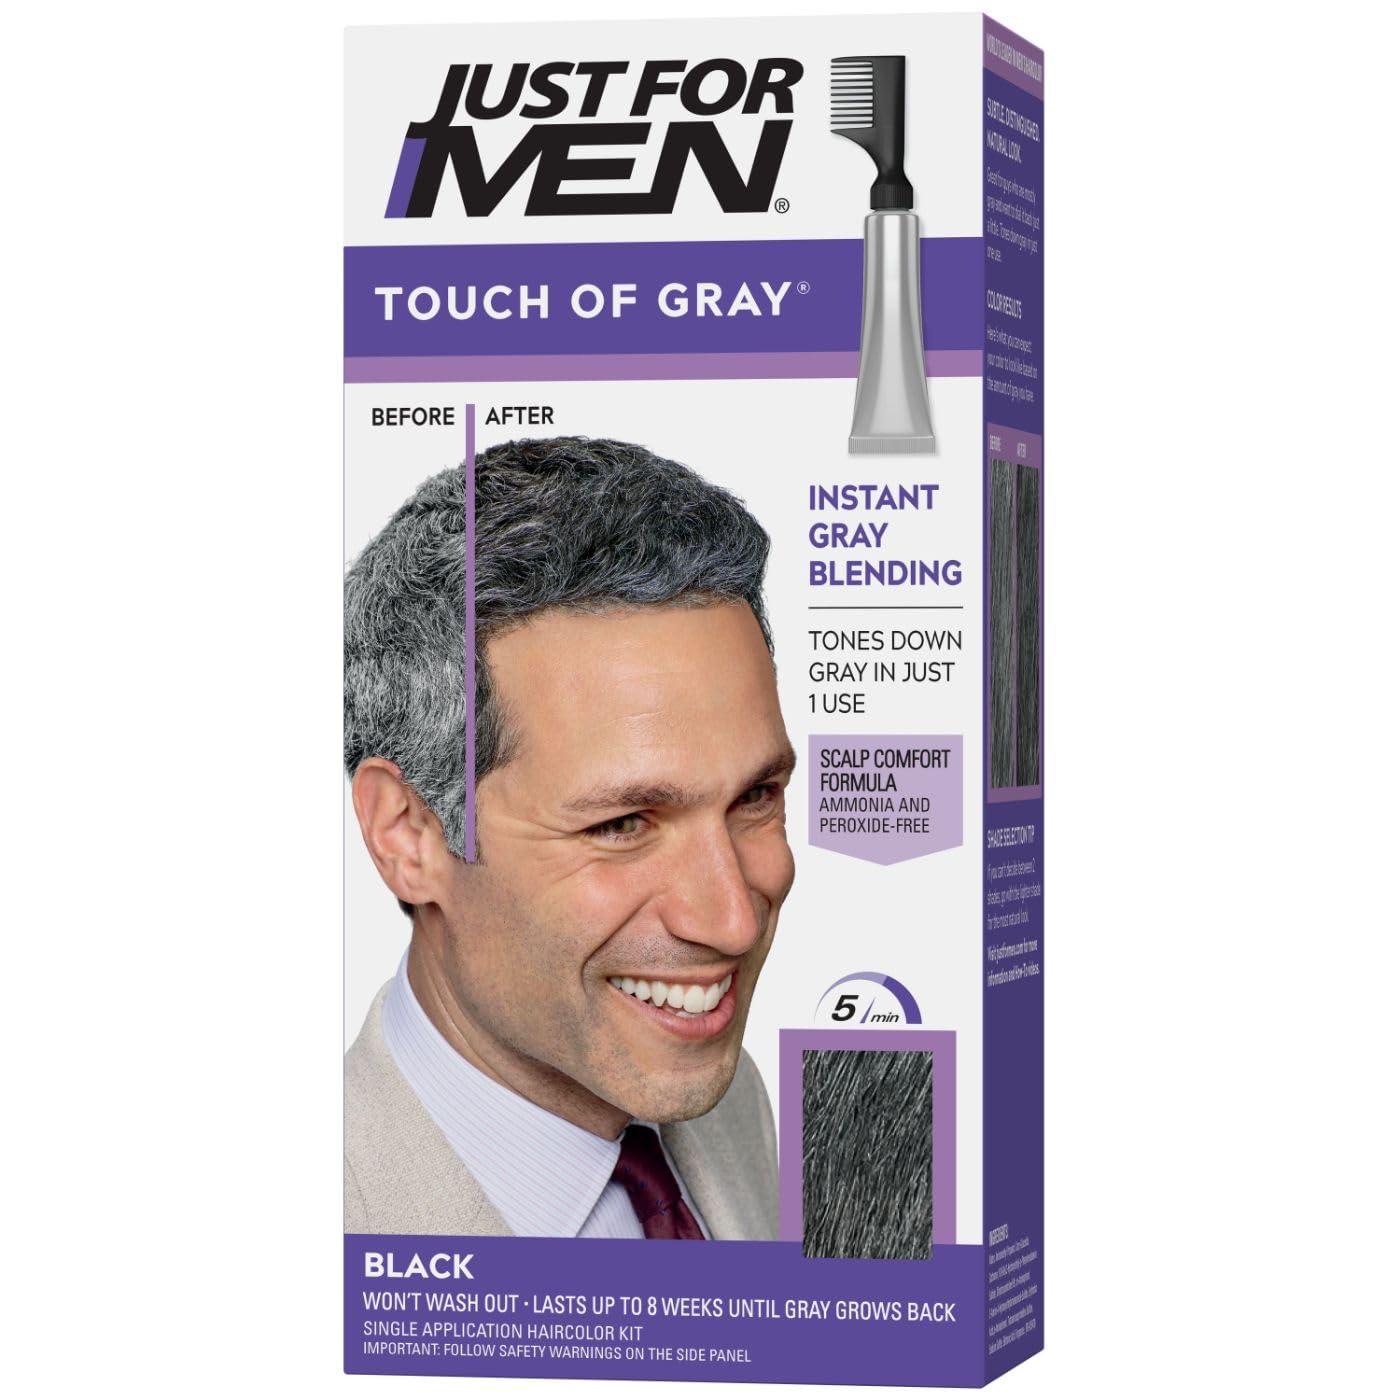 Just For Men Touch of Gray Hair Color with Comb Applicator, T-55 Black - image 1 of 7